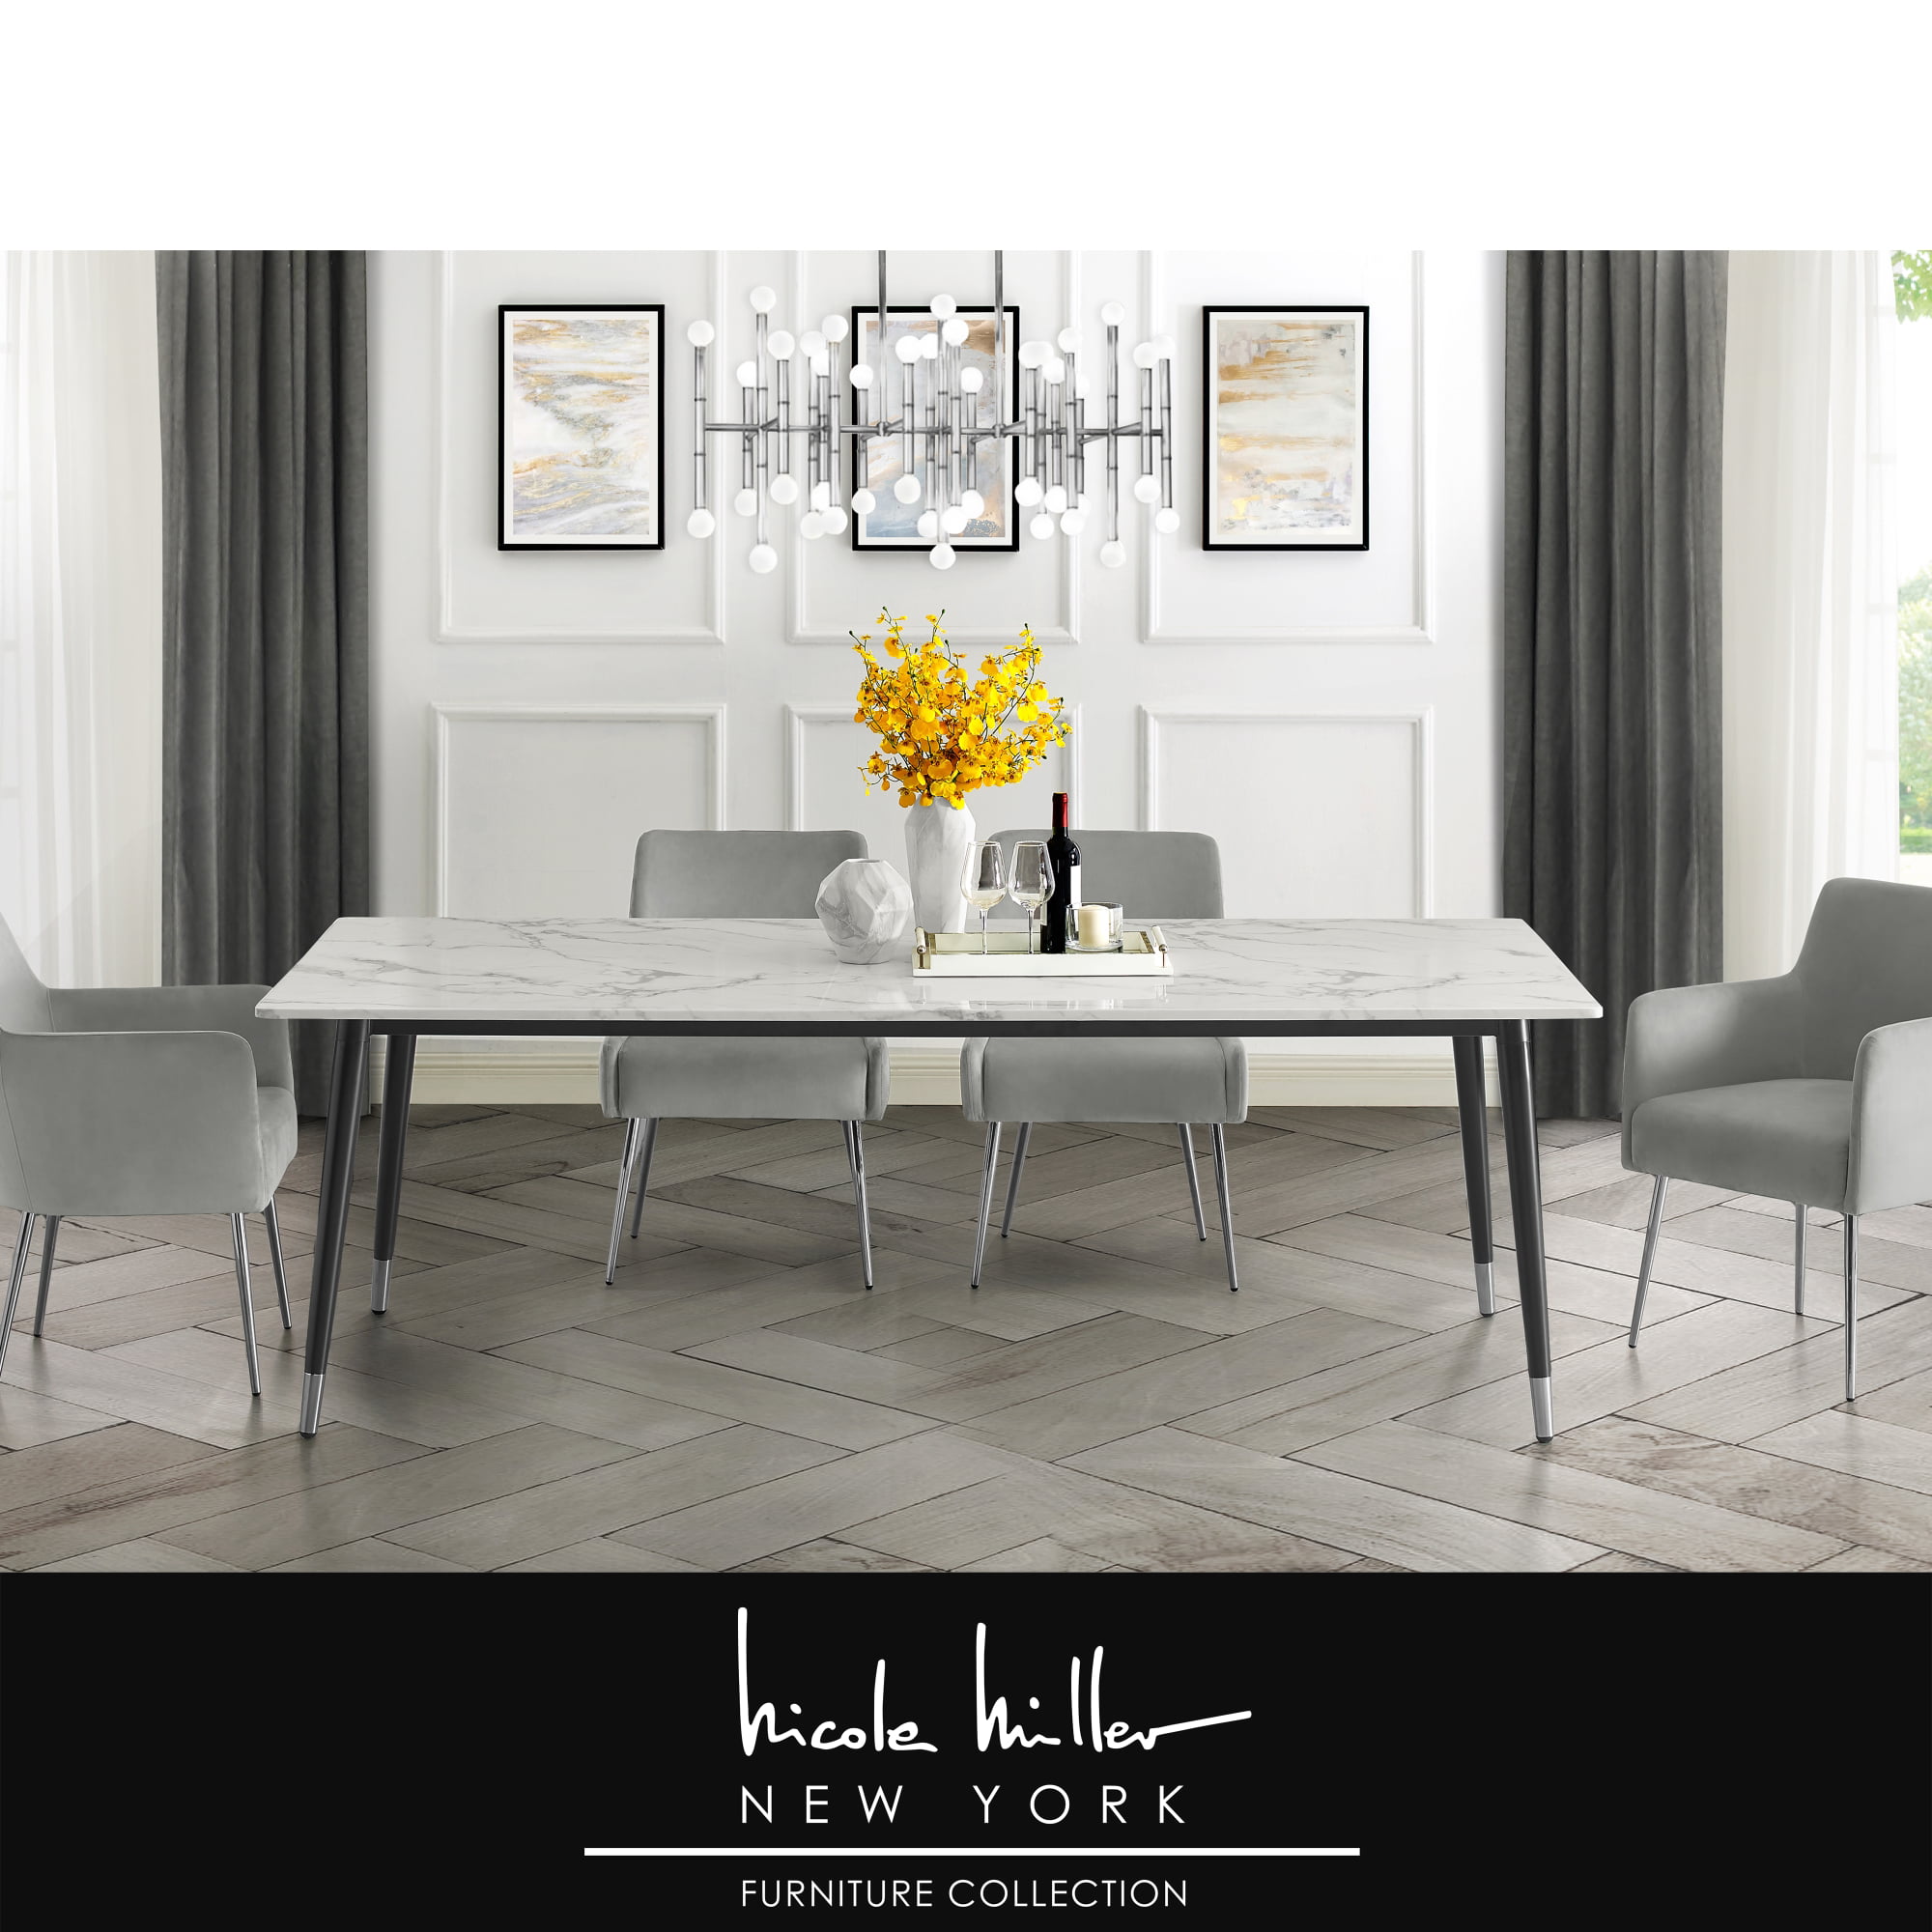 Nicole Miller Marble Dining Table, Nicole Miller Dining Chairs